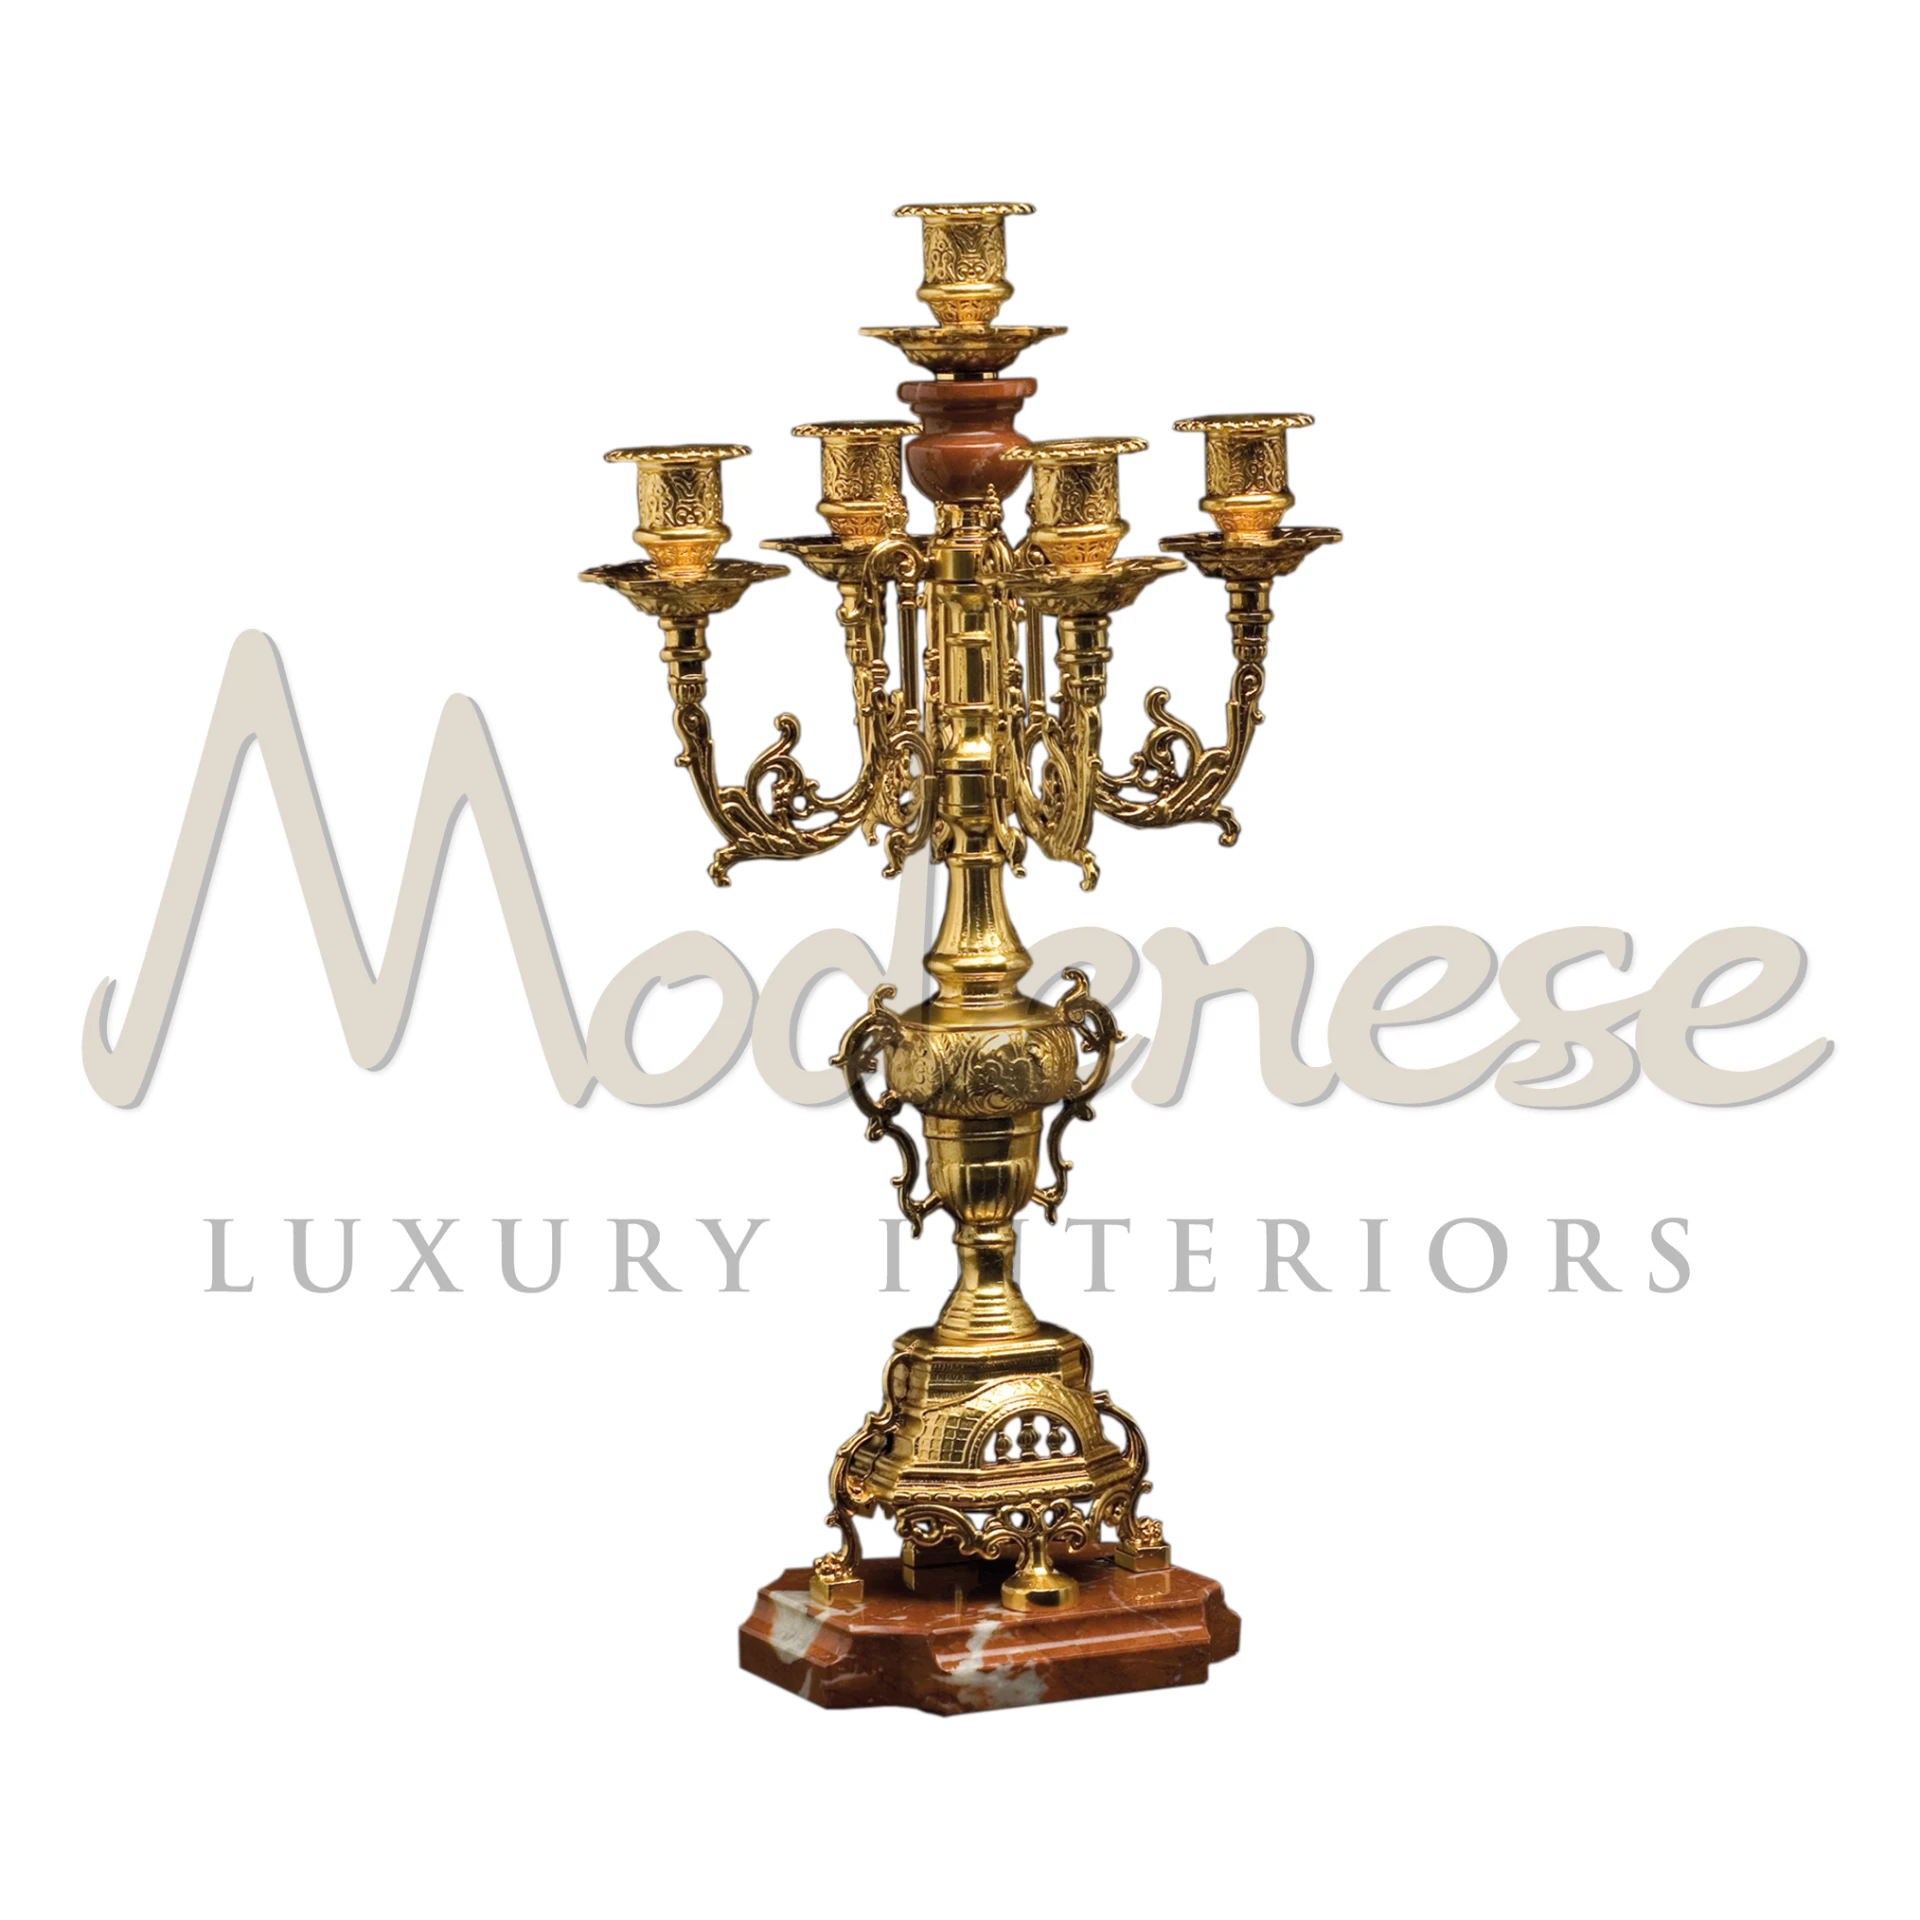 Elegant Gold Finished Candelabra with Marble Options for Luxurious Lighting